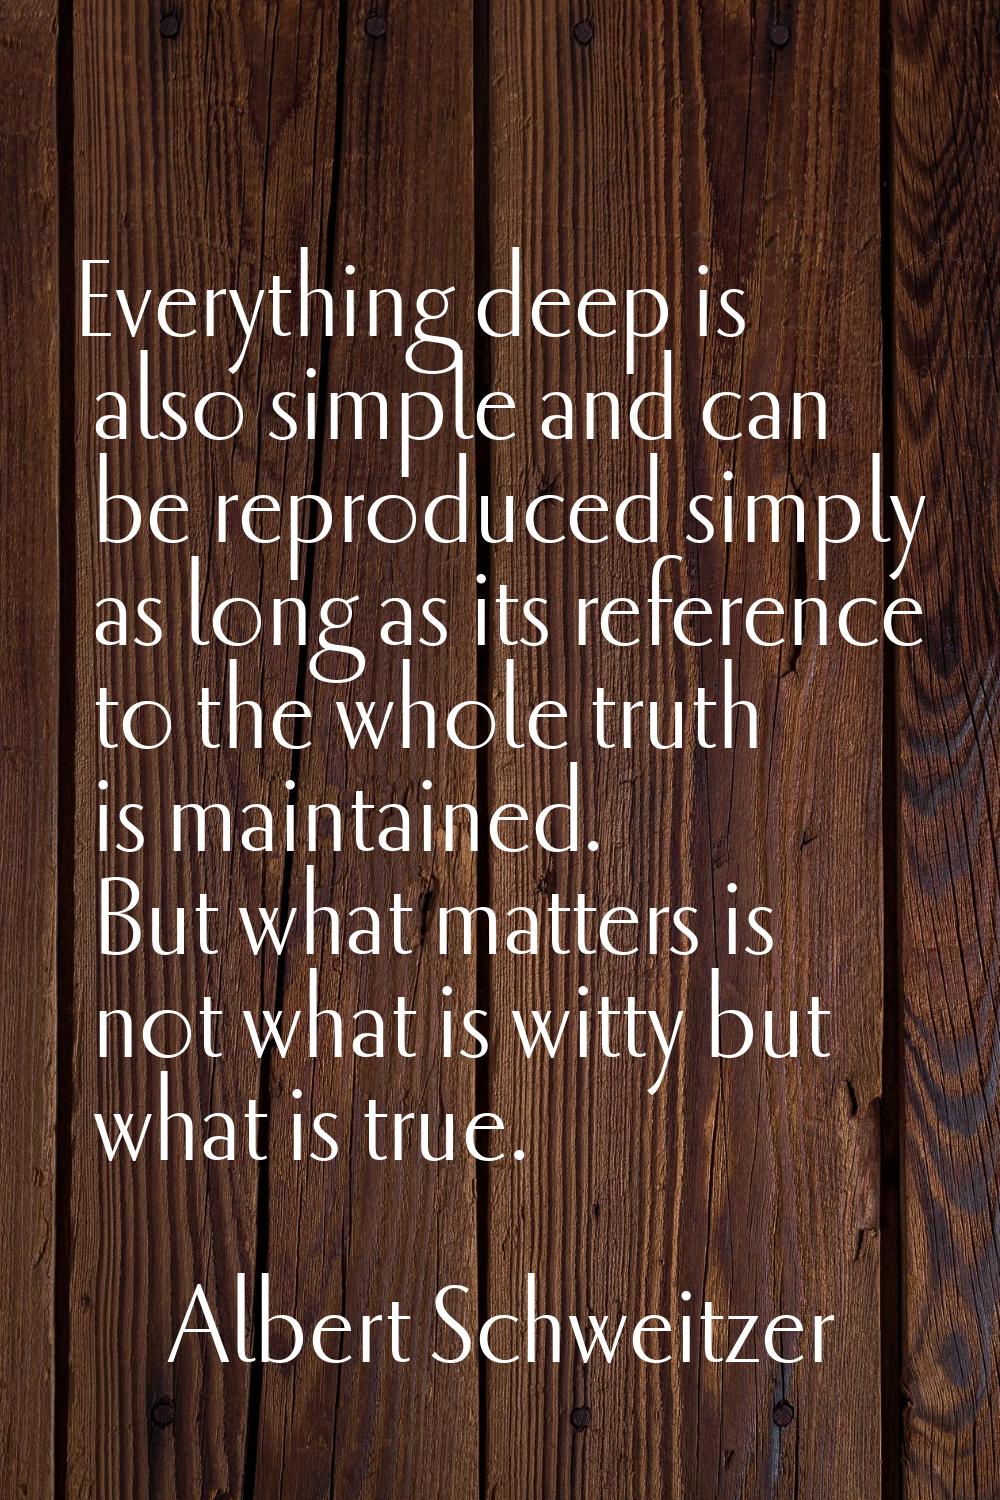 Everything deep is also simple and can be reproduced simply as long as its reference to the whole t